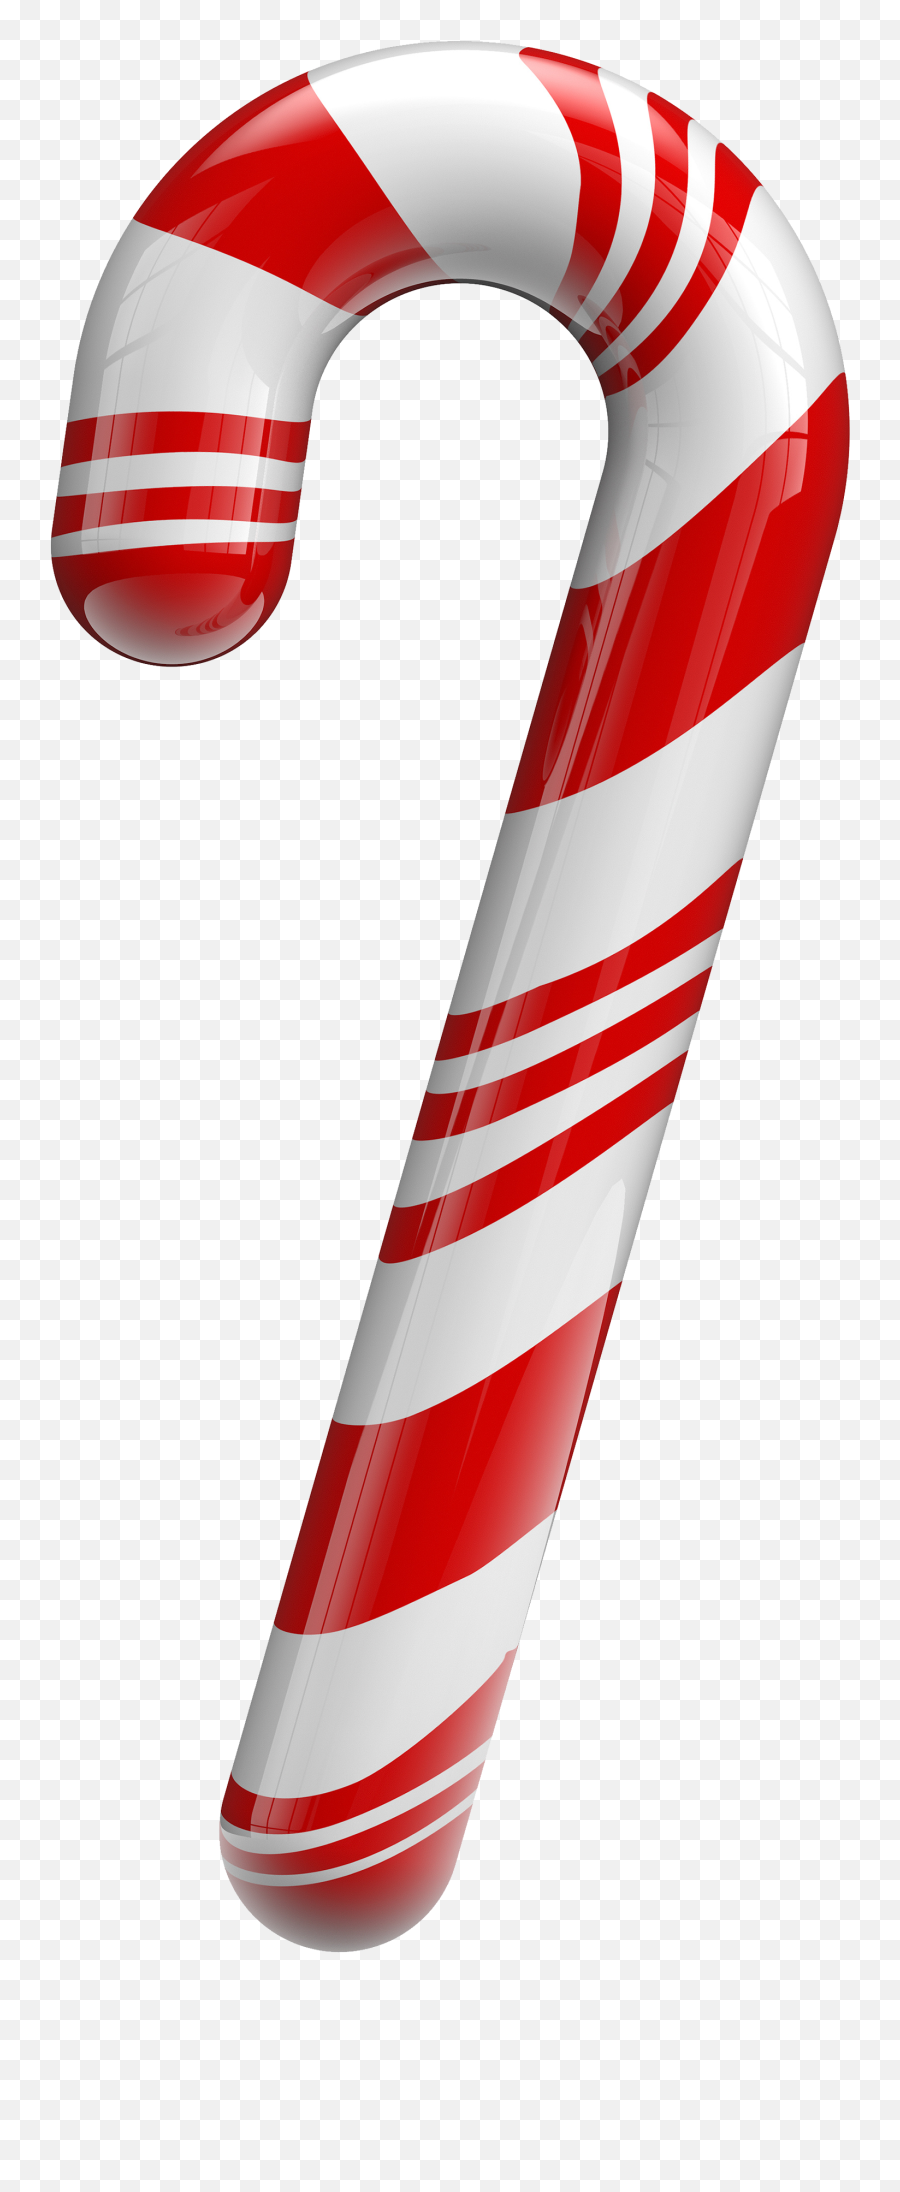 Christmas Candy Png Image Christmas Candy Download Candy - American Emoji,Candy Cane Clipart